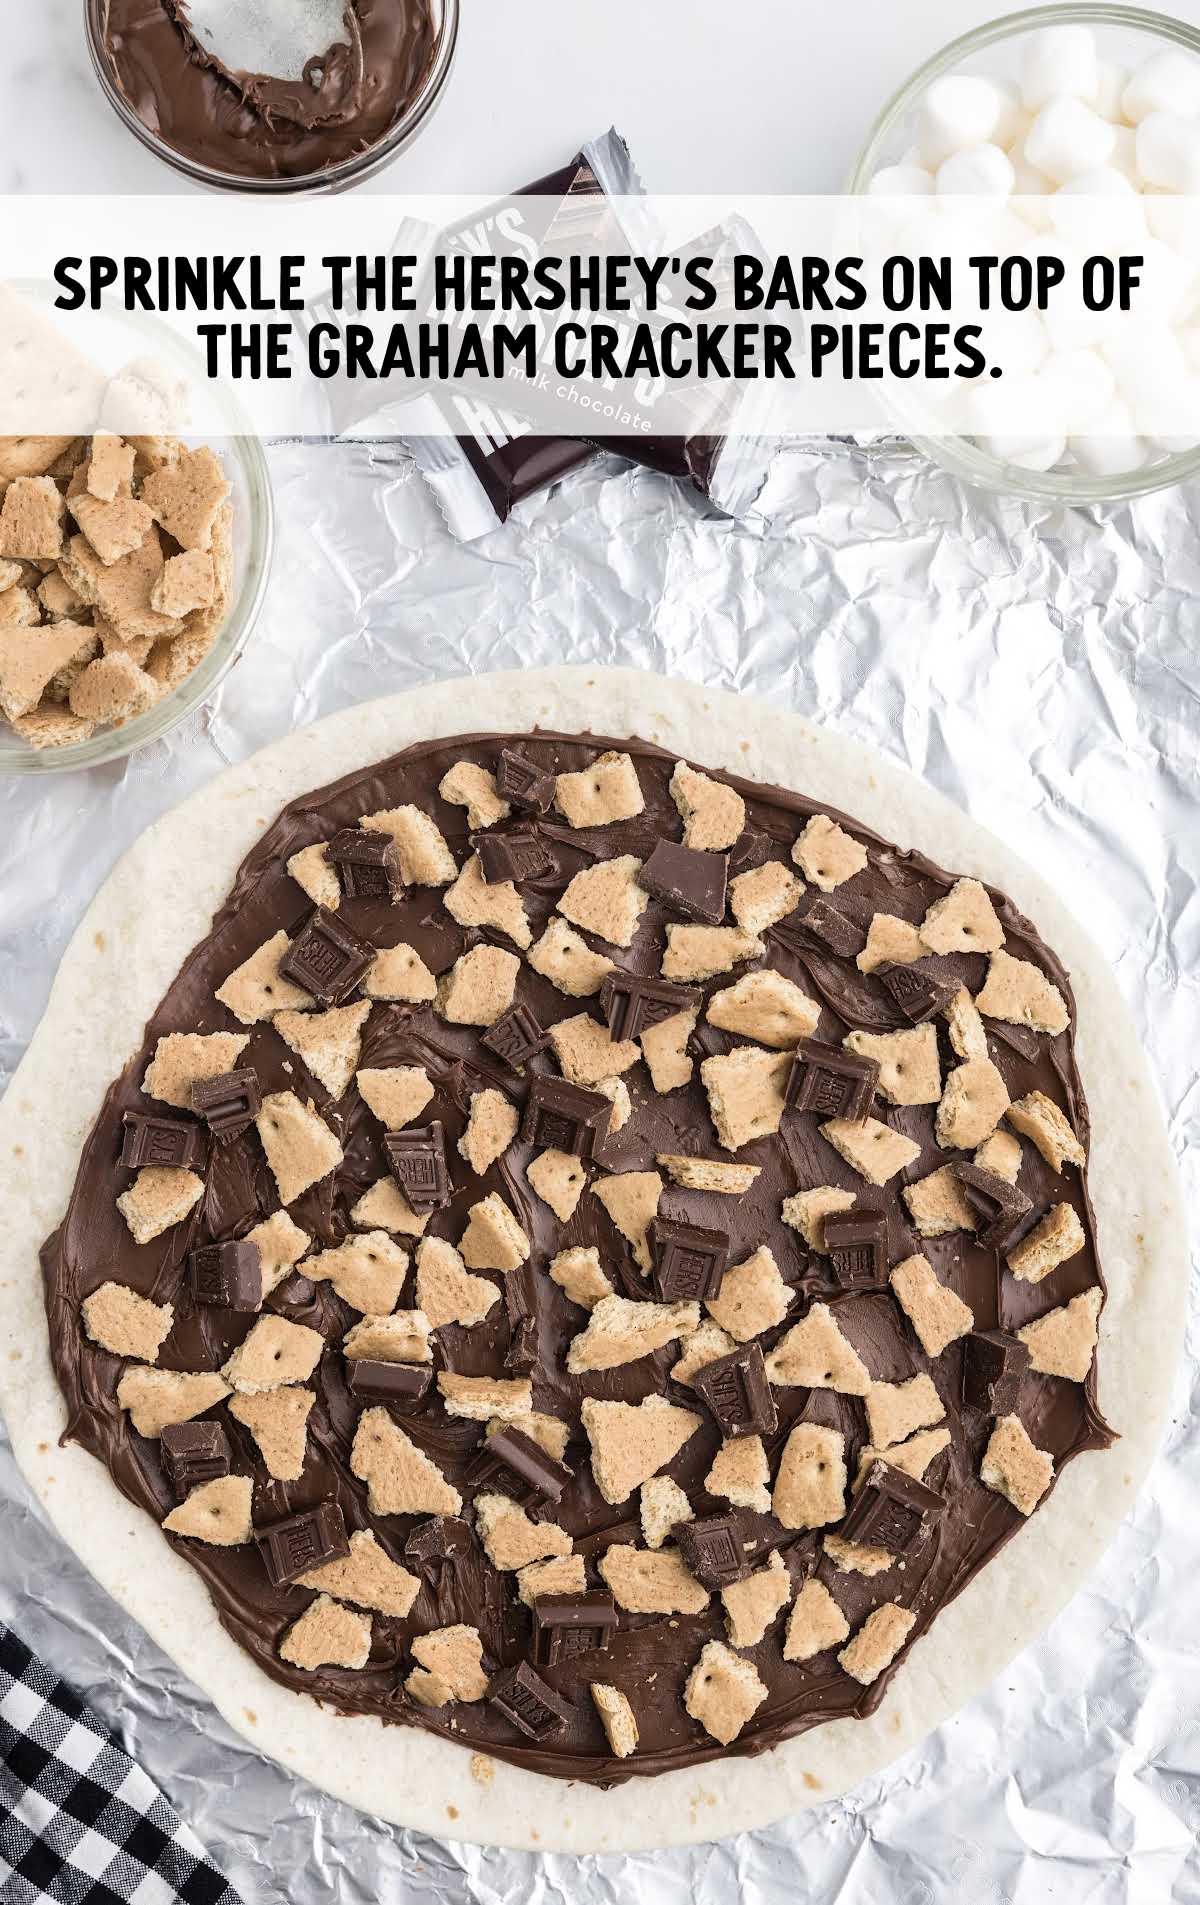 pieces of a Hershey's bar spread on top of the graham crackers